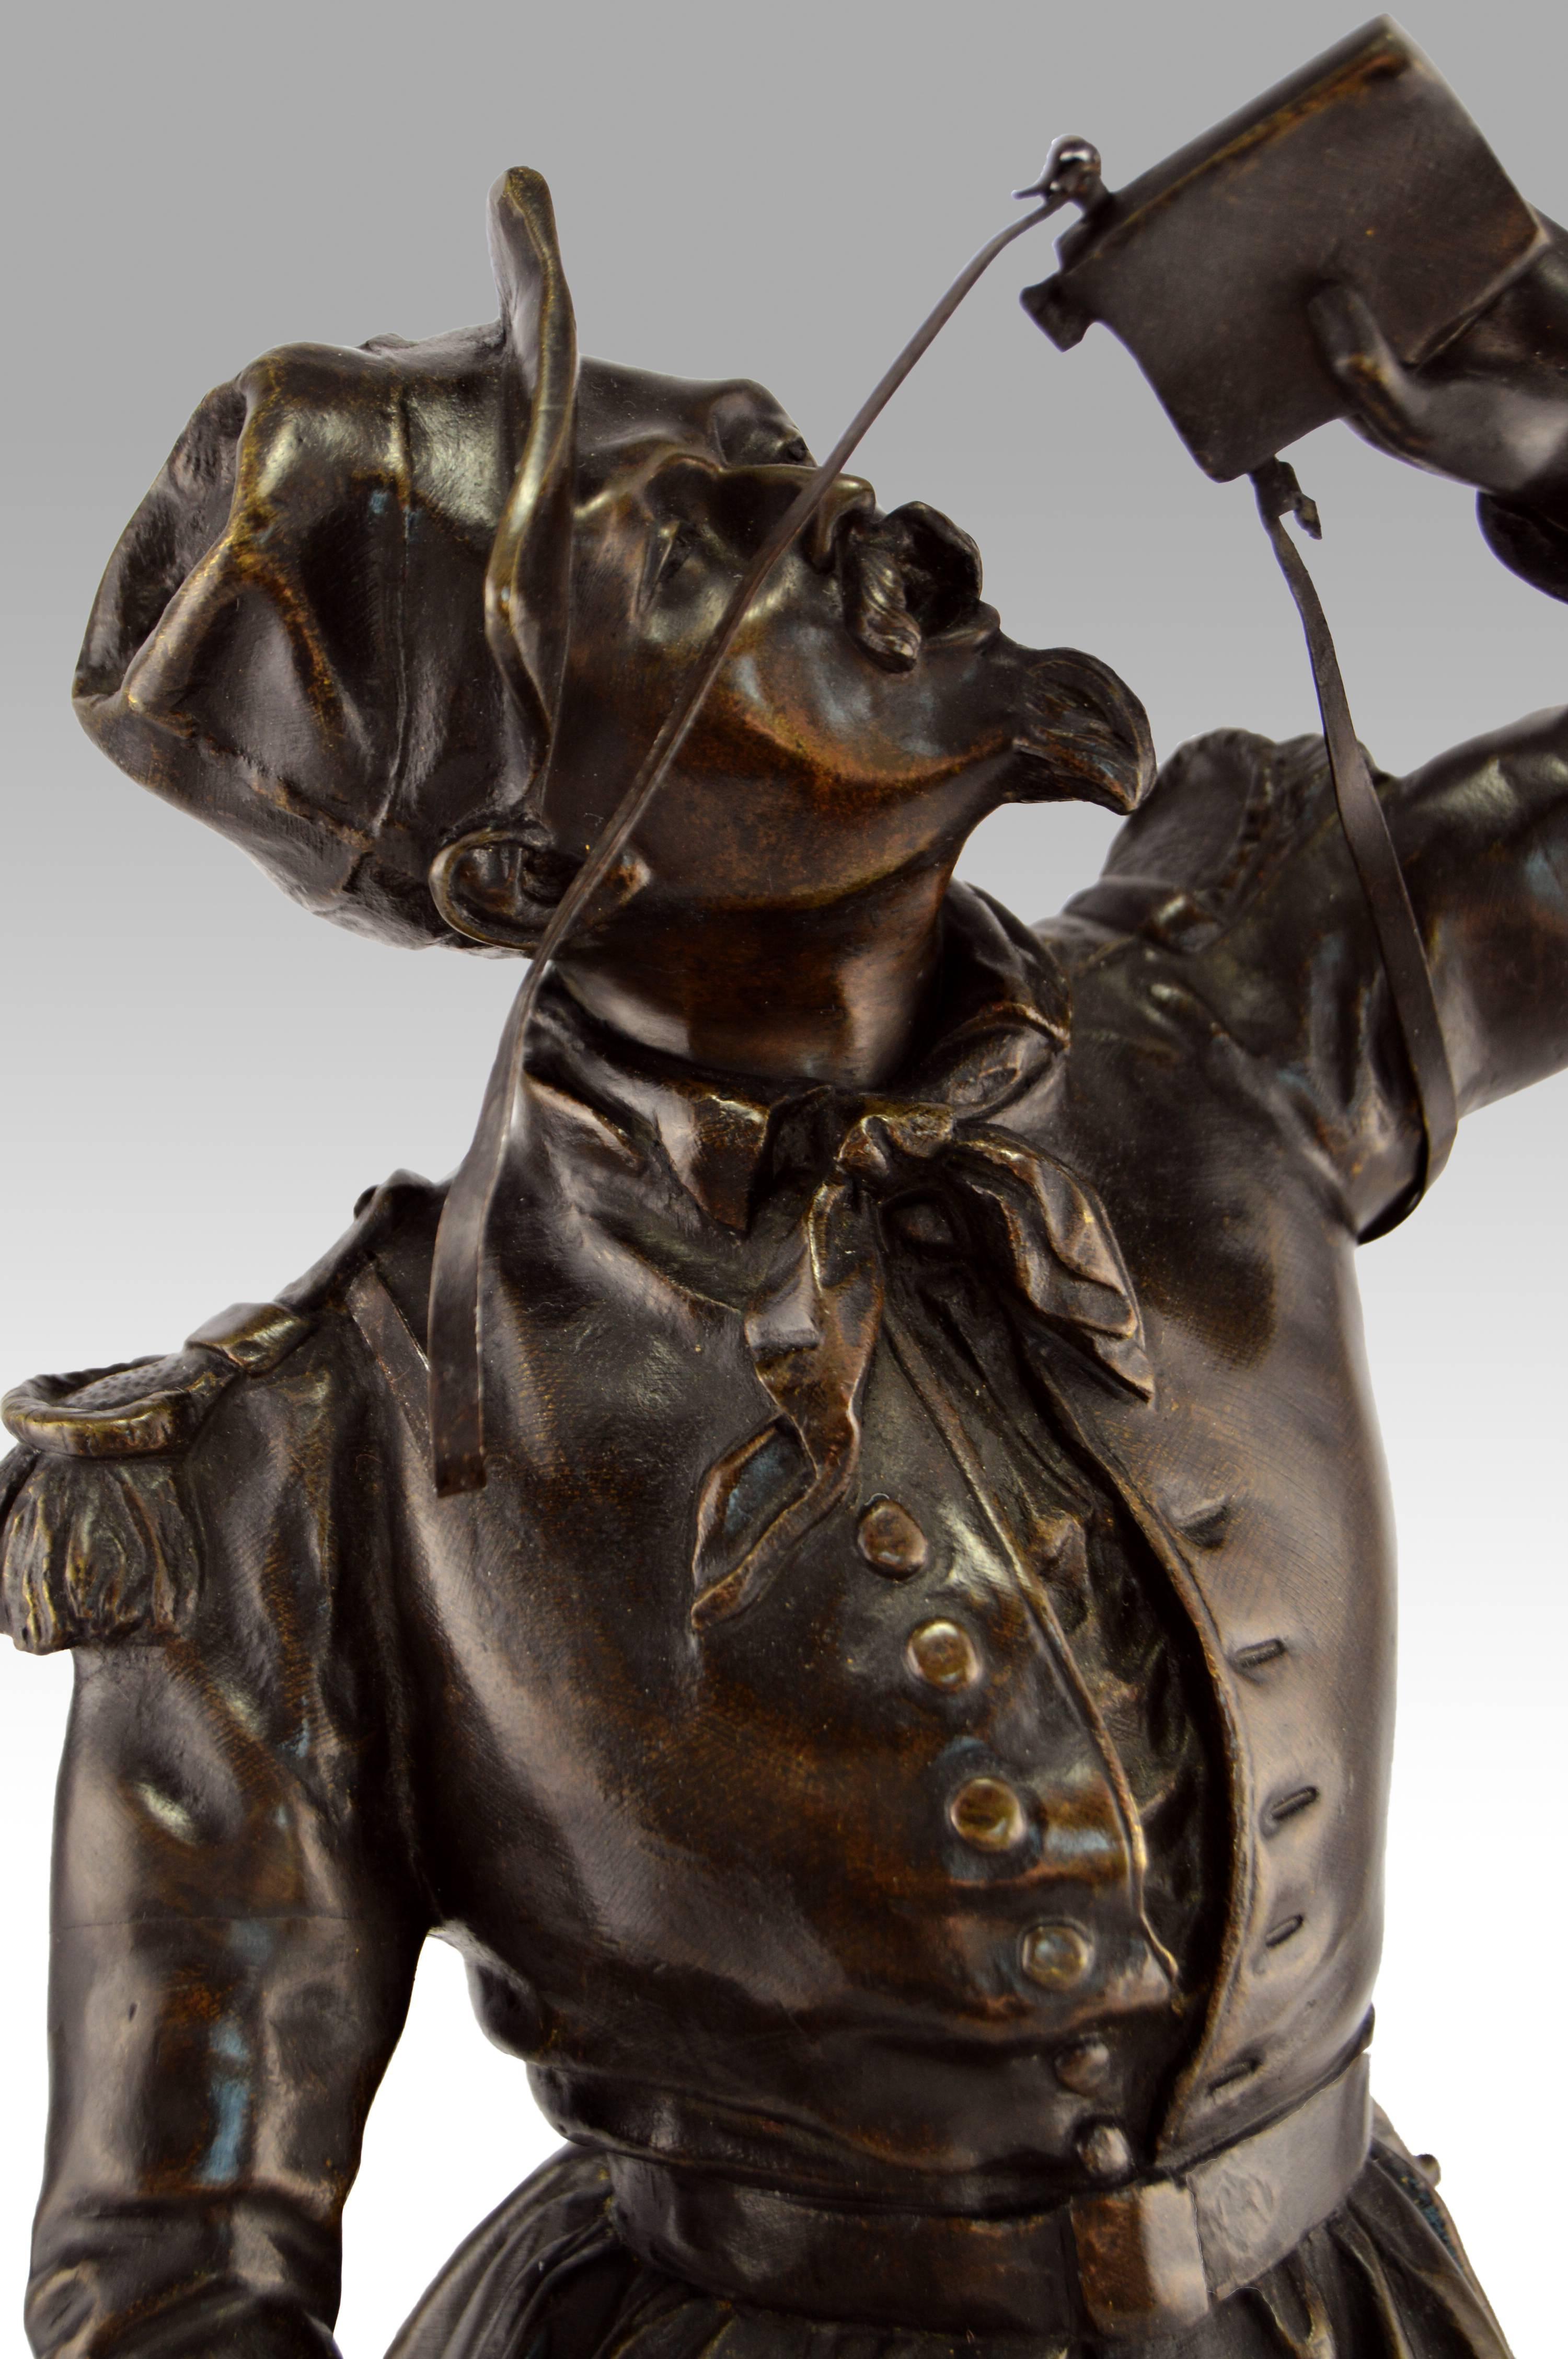 19th Century French bronze sculpture of a soldier - Victorian Sculpture by Léopold Eugène Kampf